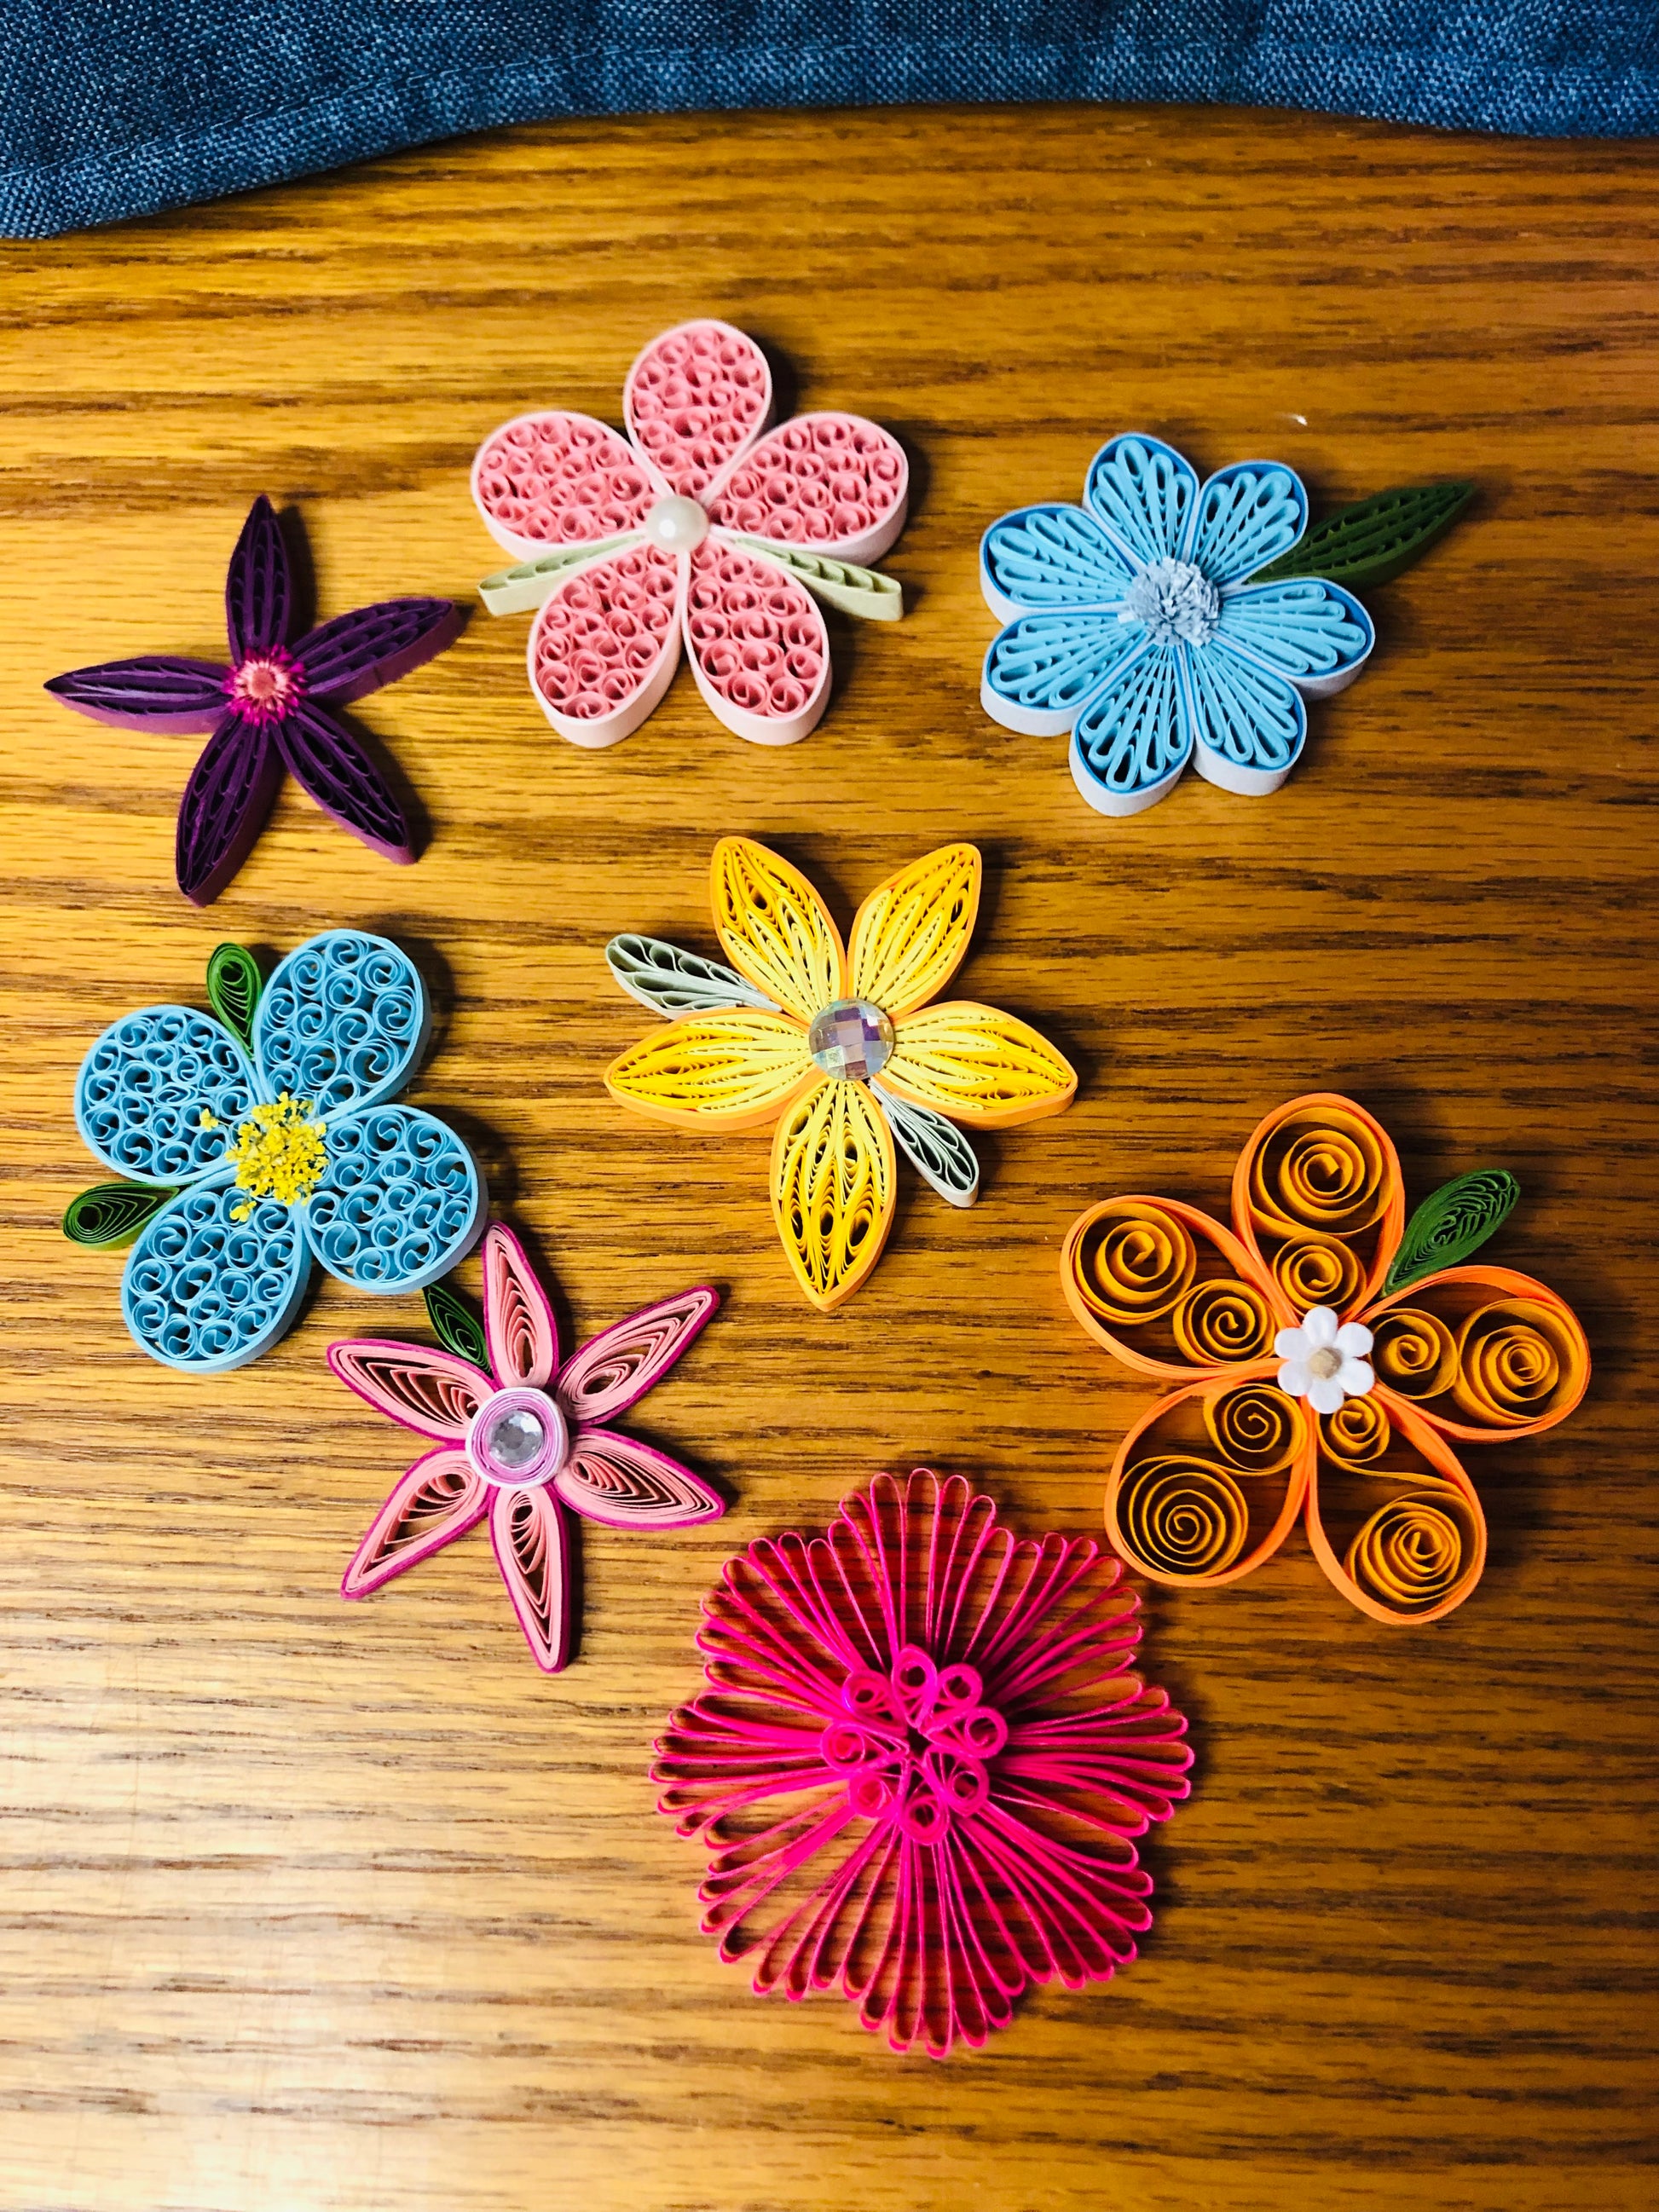 Paper Quilling Tips for Beginners